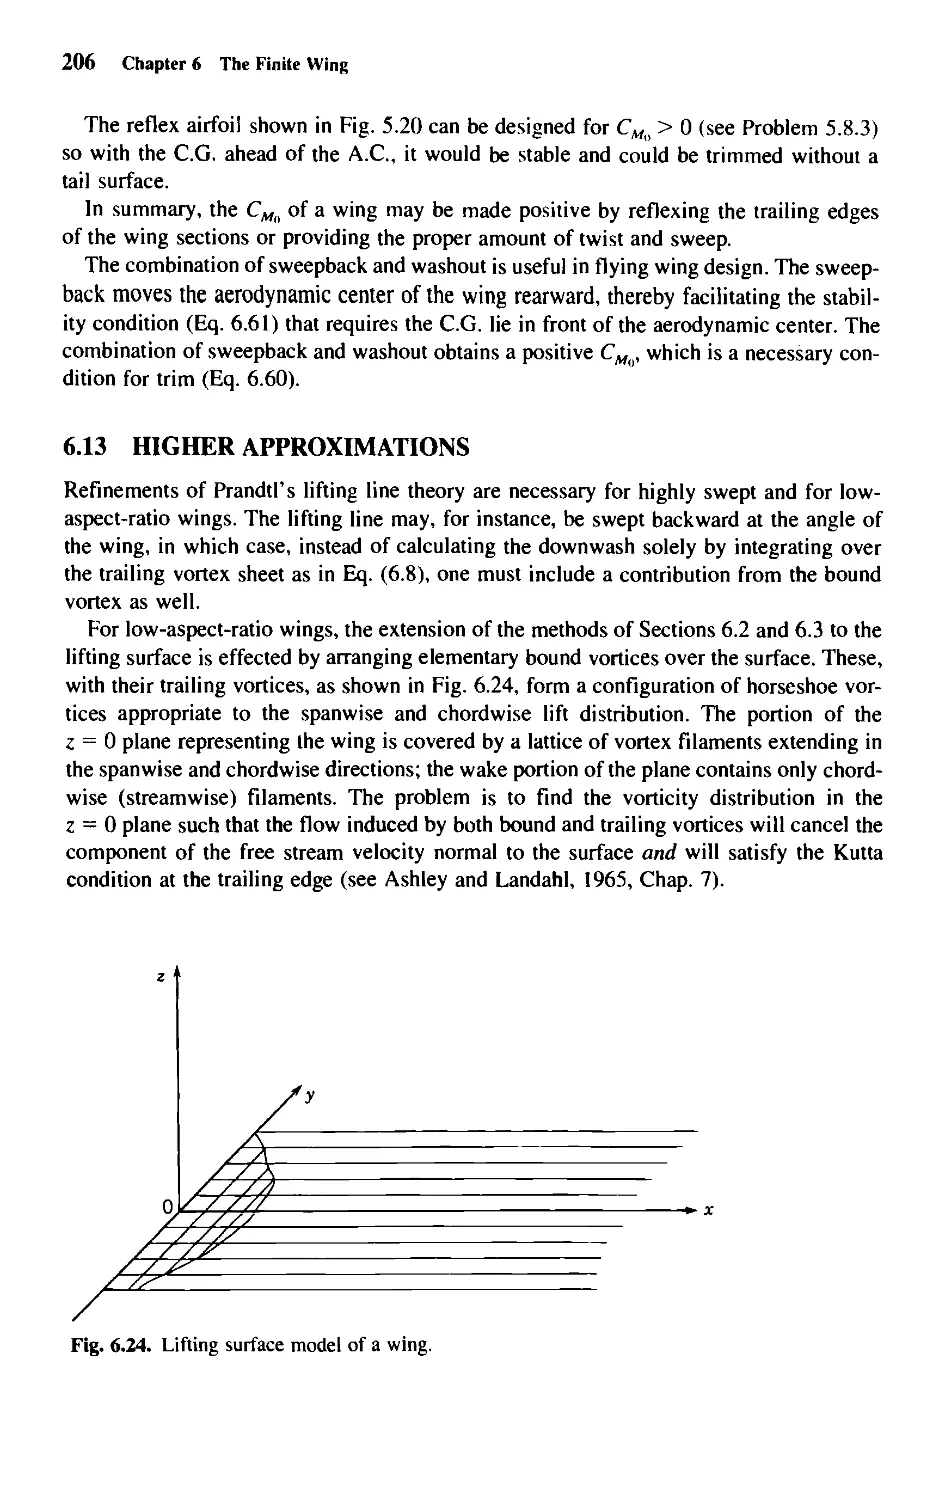 6.13 - Higher Approximations